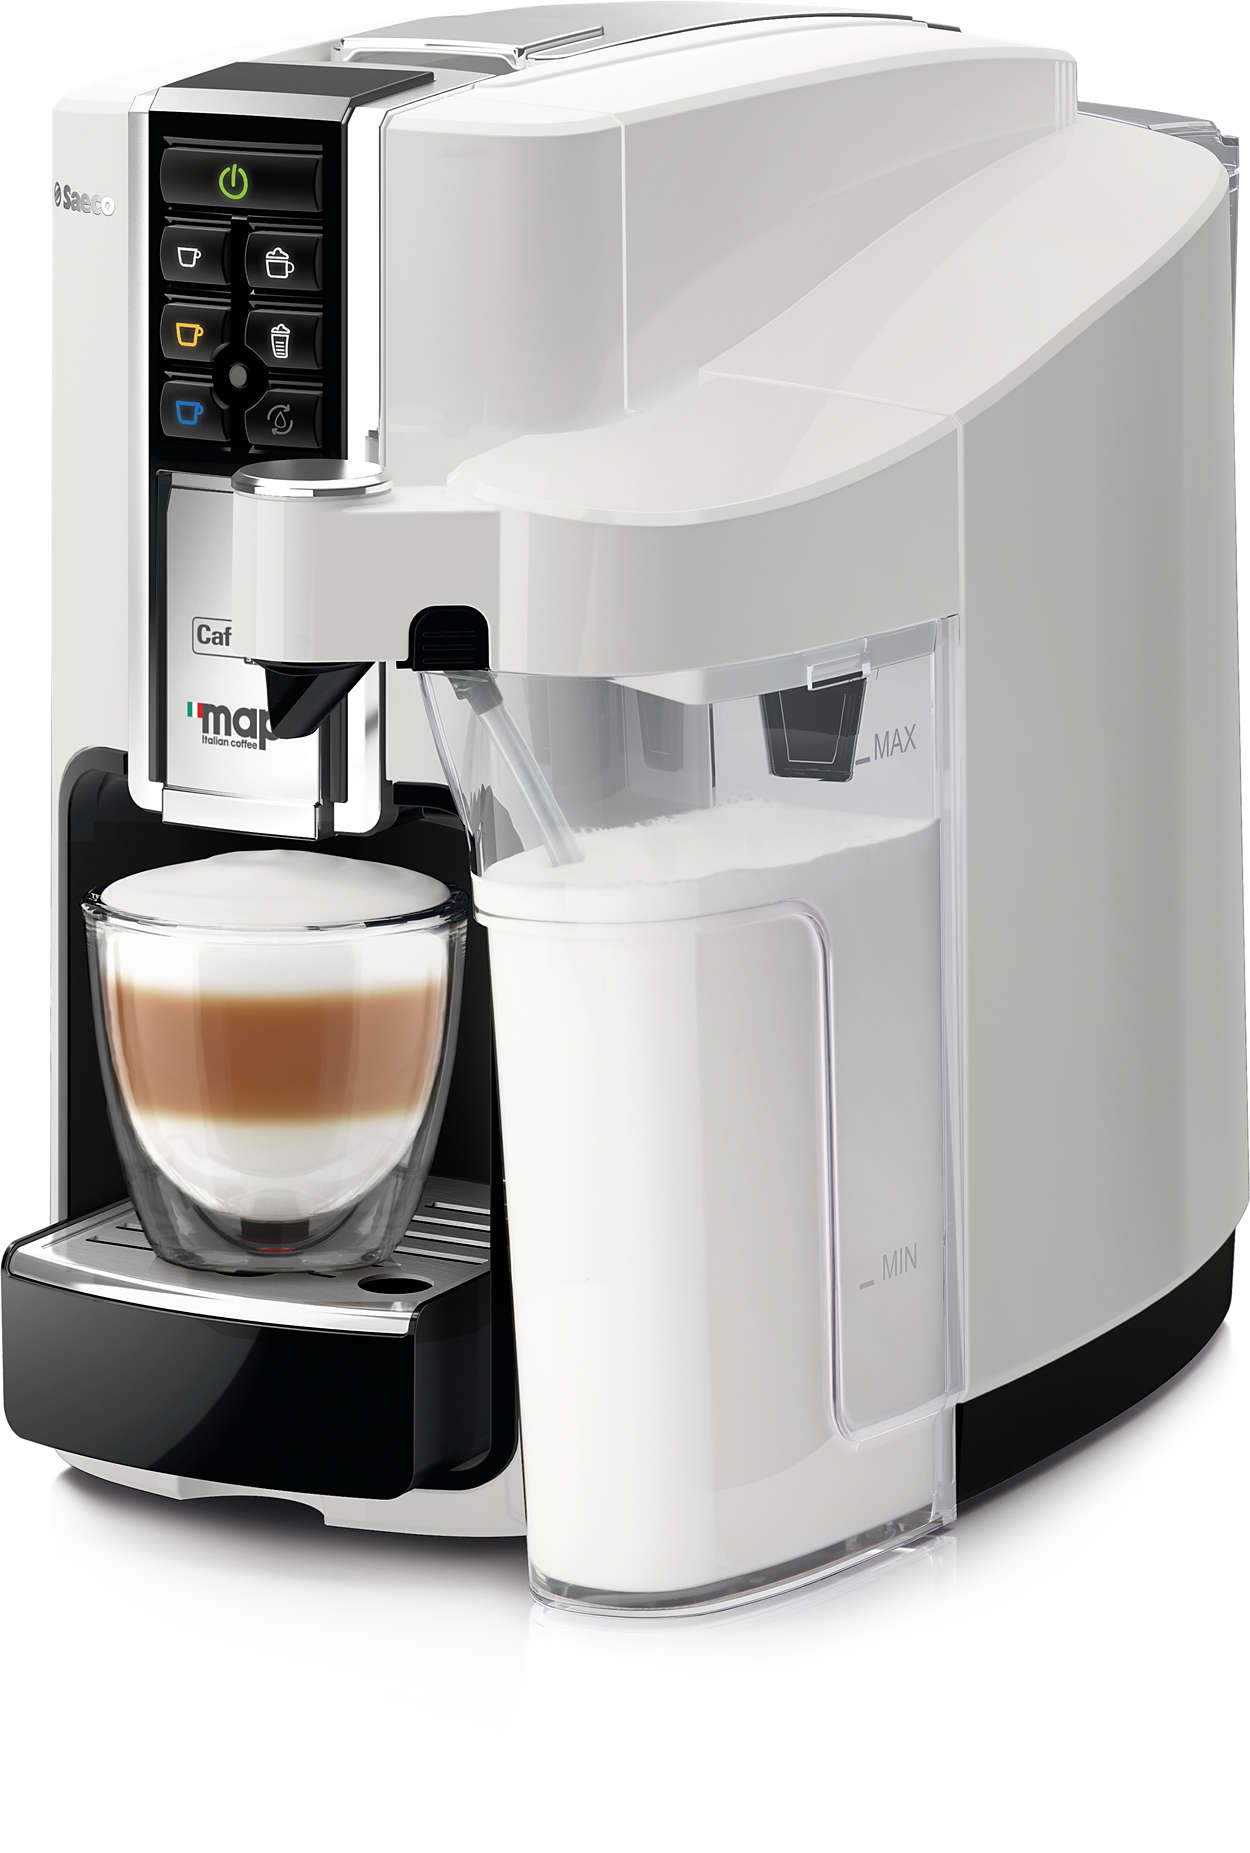 The full automatic of coffee capsule machines